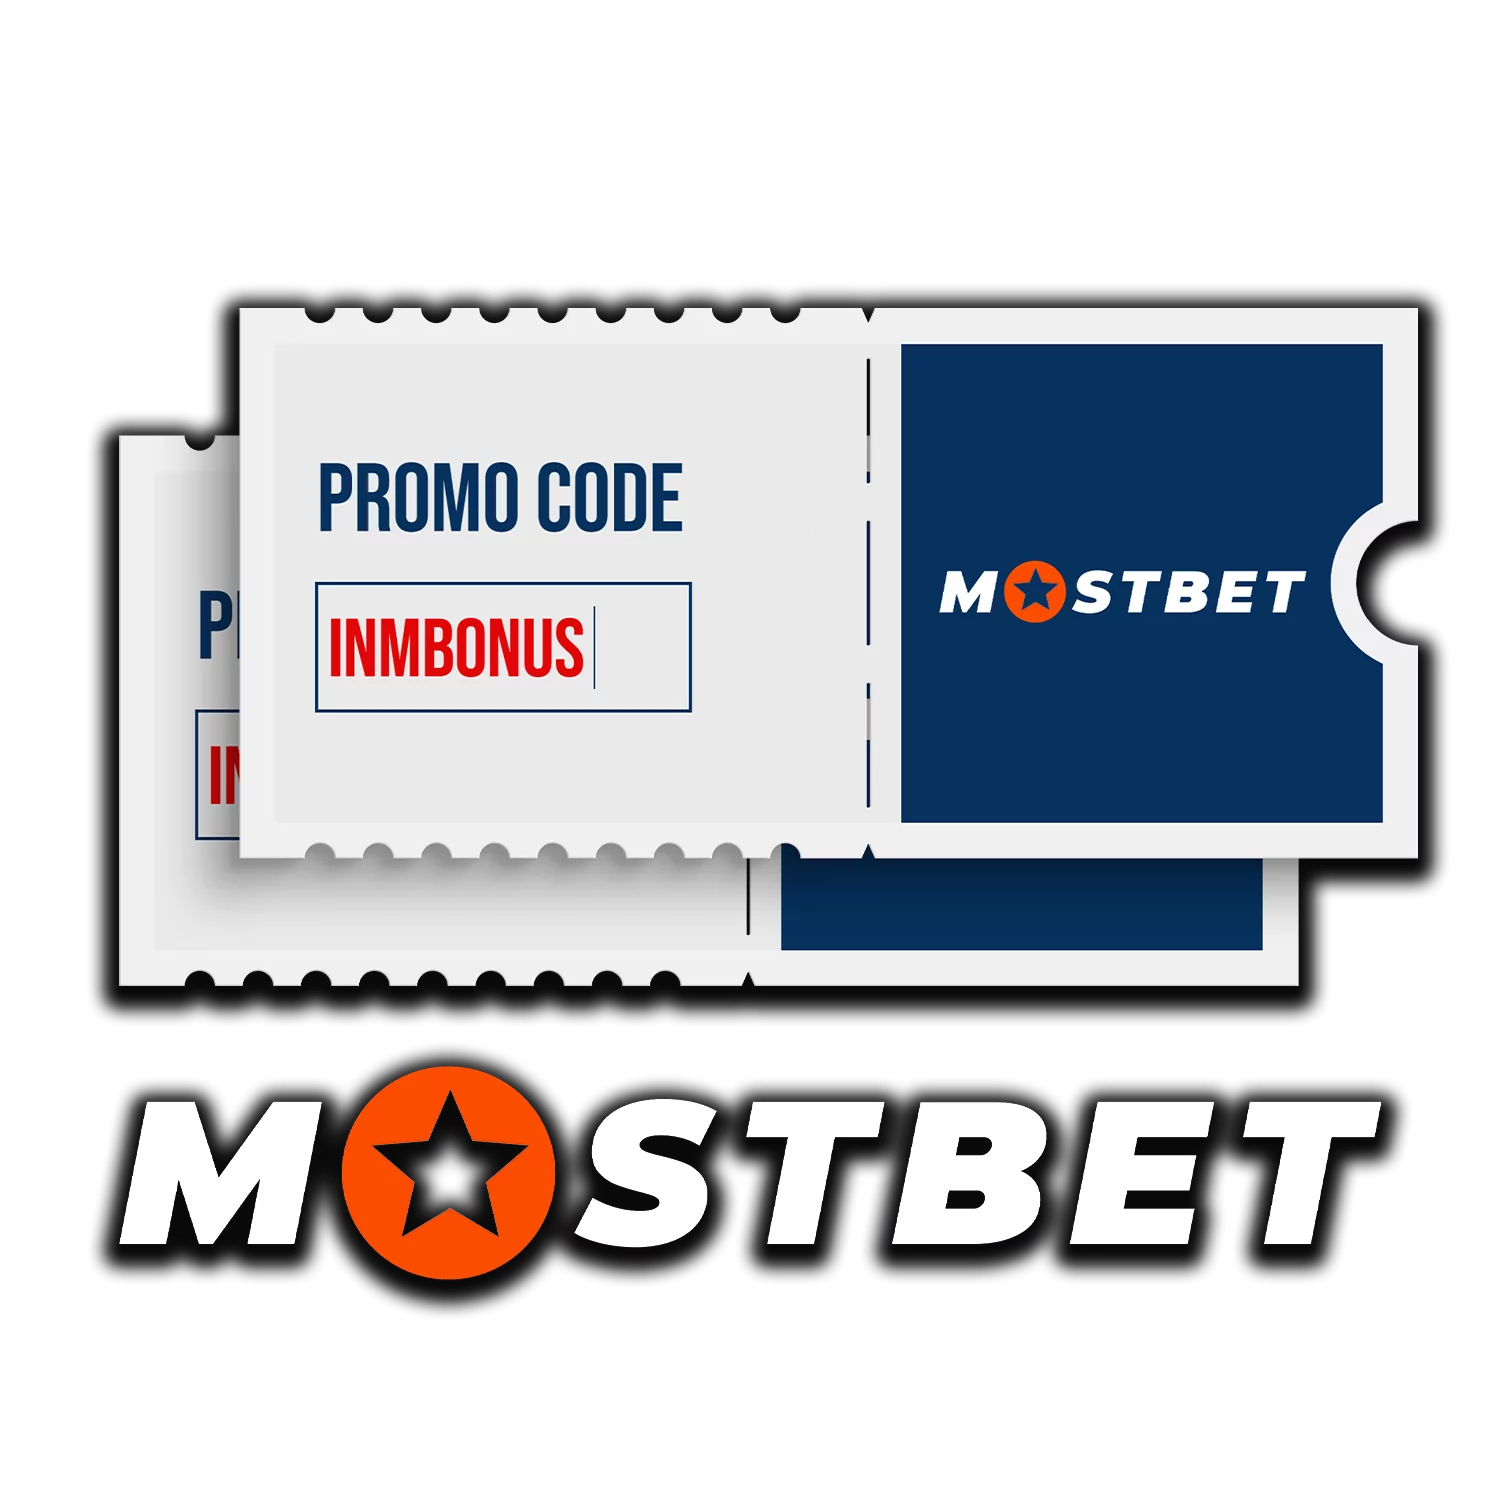 Super Useful Tips To Improve Mostbet TR-40 Betting Company Review